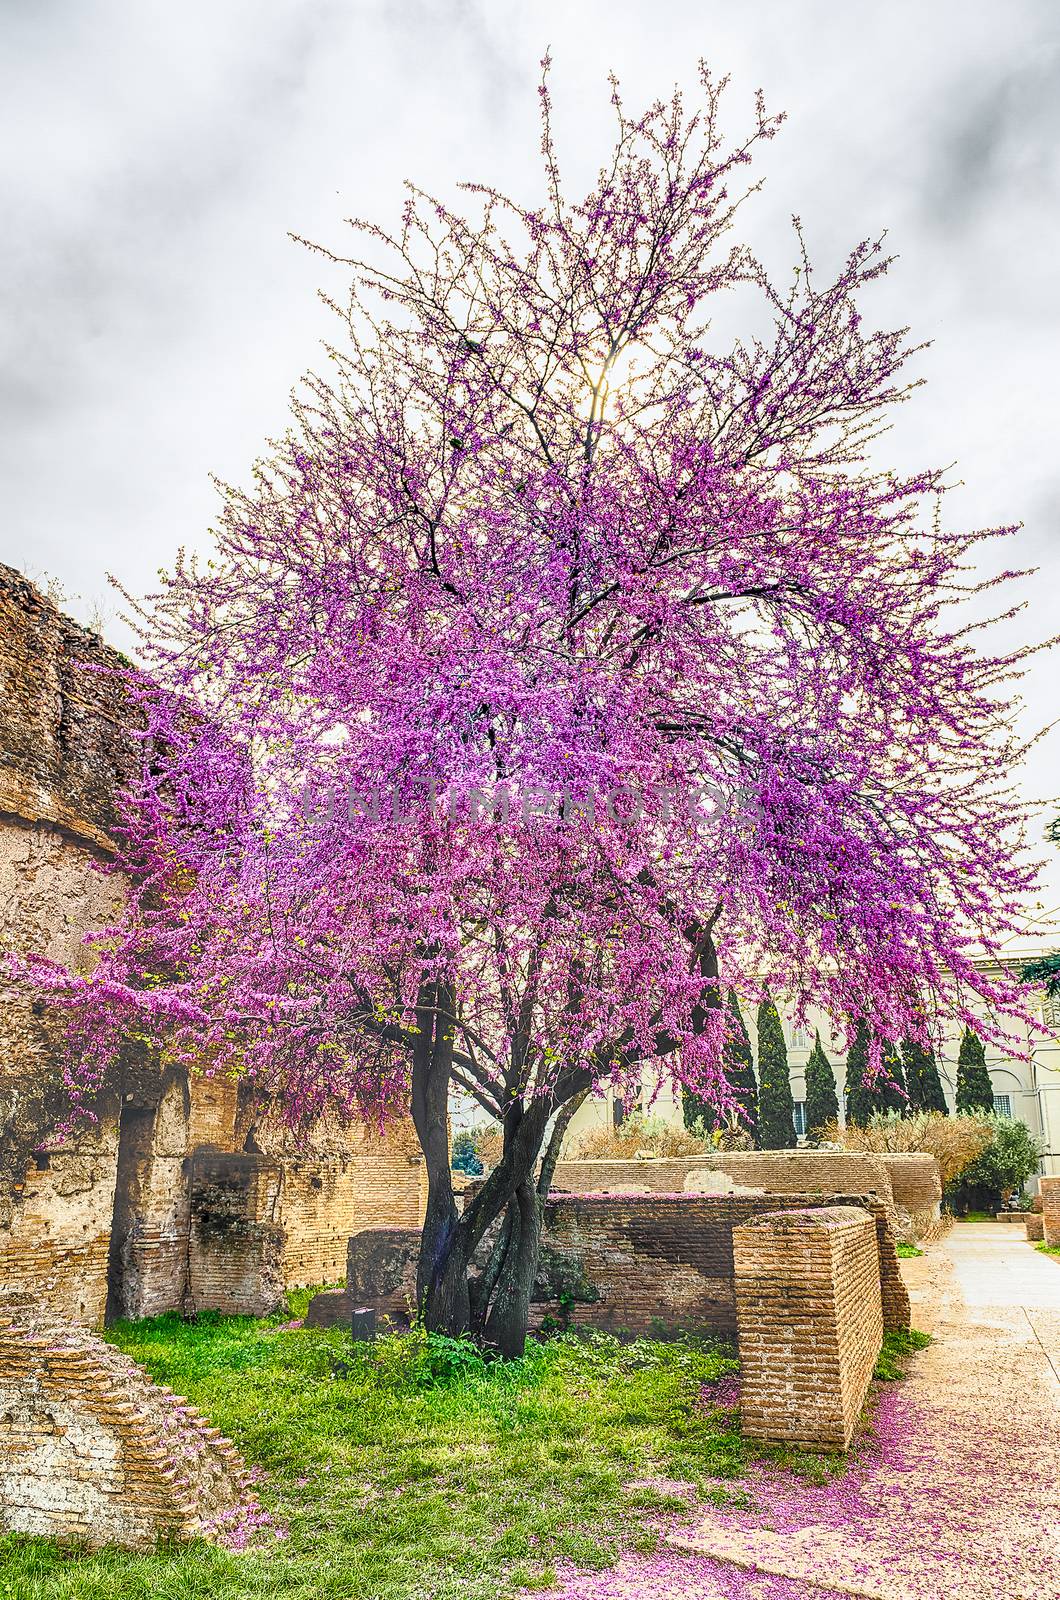 Beautiful purple cherry tree in spring, seen on Palatine Hill in Rome, Italy